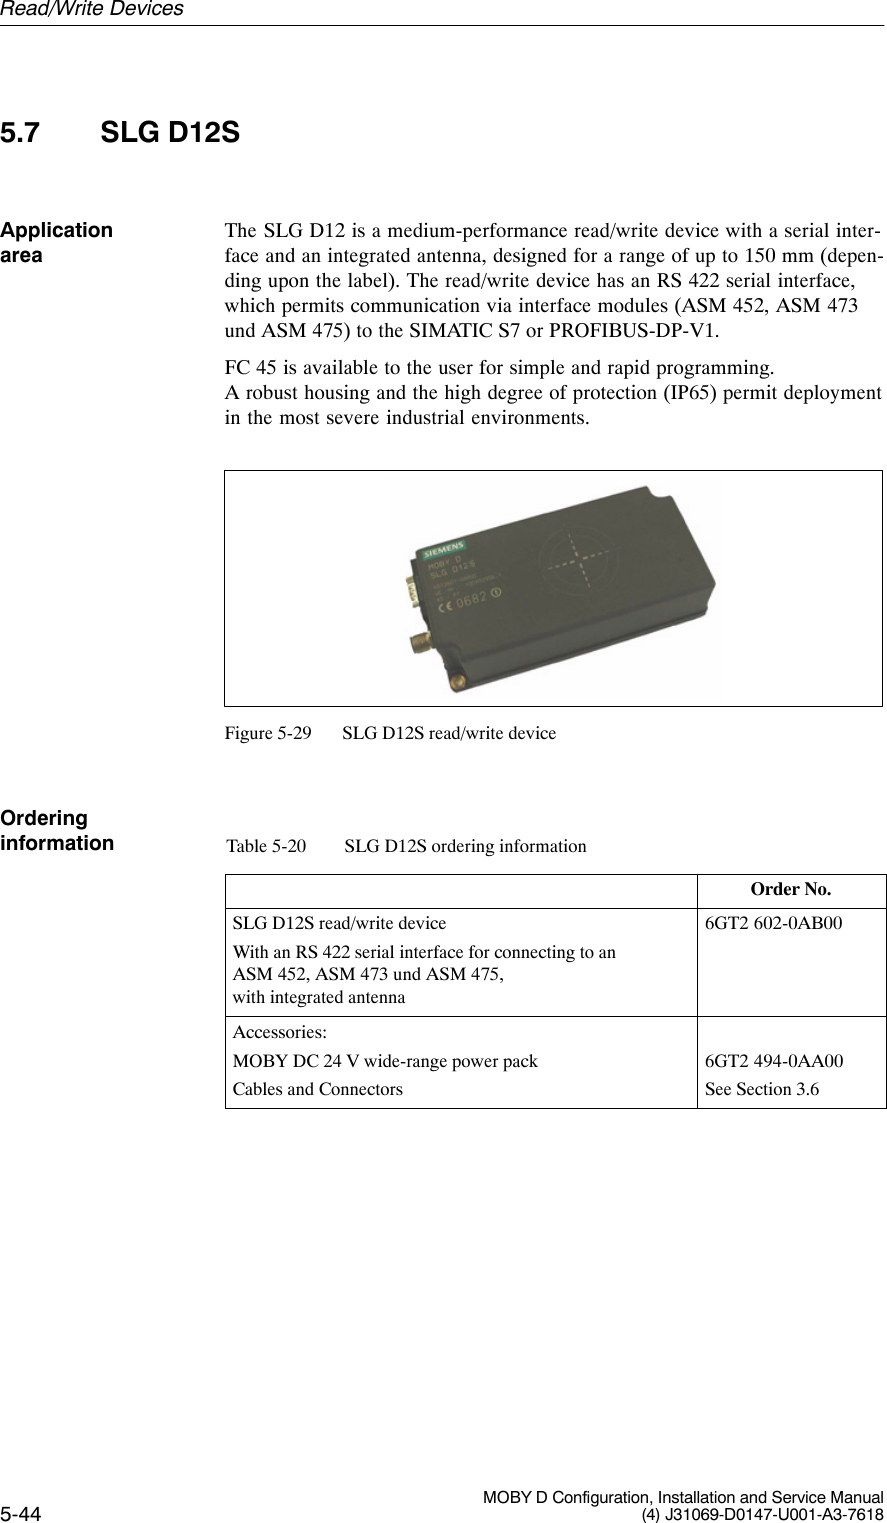 5-44 MOBY D Configuration, Installation and Service Manual(4) J31069-D0147-U001-A3-76185.7 SLG D12SThe SLG D12 is a medium-performance read/write device with a serial inter-face and an integrated antenna, designed for a range of up to 150 mm (depen-ding upon the label). The read/write device has an RS 422 serial interface,which permits communication via interface modules (ASM 452, ASM 473und ASM 475) to the SIMATIC S7 or PROFIBUS-DP-V1.FC 45 is available to the user for simple and rapid programming. A robust housing and the high degree of protection (IP65) permit deploymentin the most severe industrial environments.Figure 5-29 SLG D12S read/write deviceTable 5-20 SLG D12S ordering informationOrder No.SLG D12S read/write deviceWith an RS 422 serial interface for connecting to anASM 452, ASM 473 und ASM 475,with integrated antenna6GT2 602-0AB00Accessories:MOBY DC 24 V wide-range power packCables and Connectors6GT2 494-0AA00See Section 3.6Application areaOrderinginformationRead/Write Devices